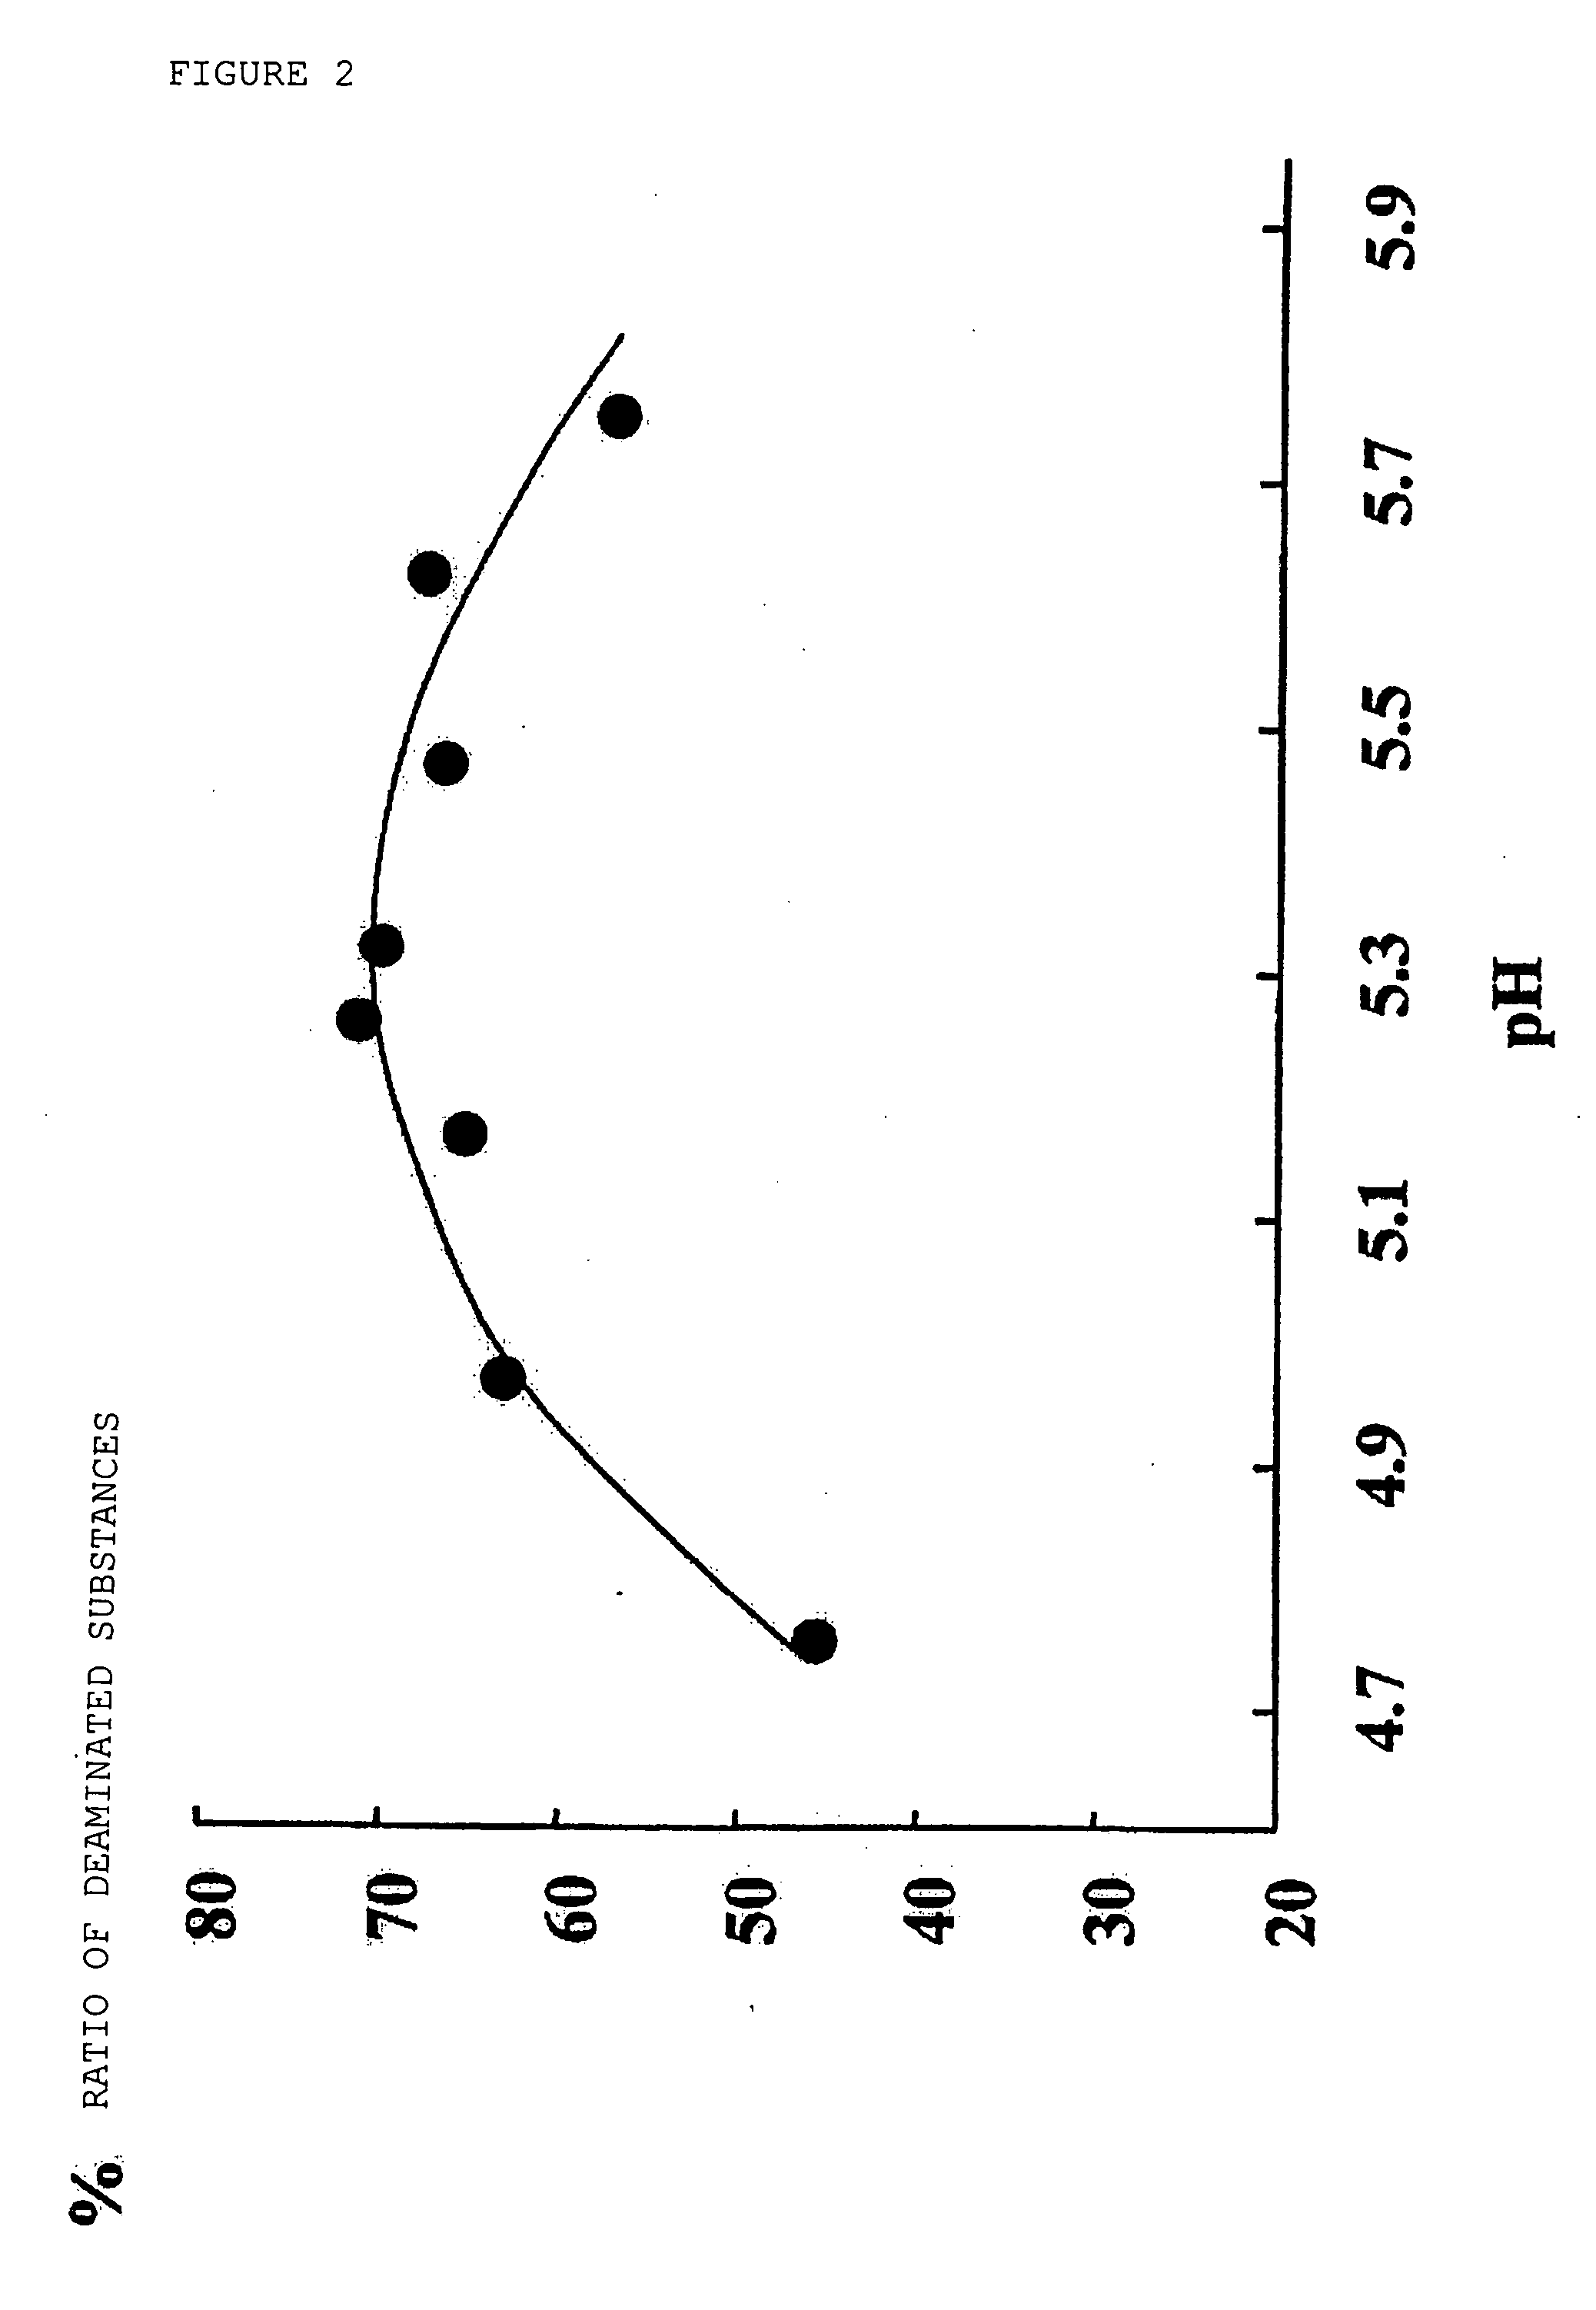 Composition for deaminating dna and method of detecting methylated dna